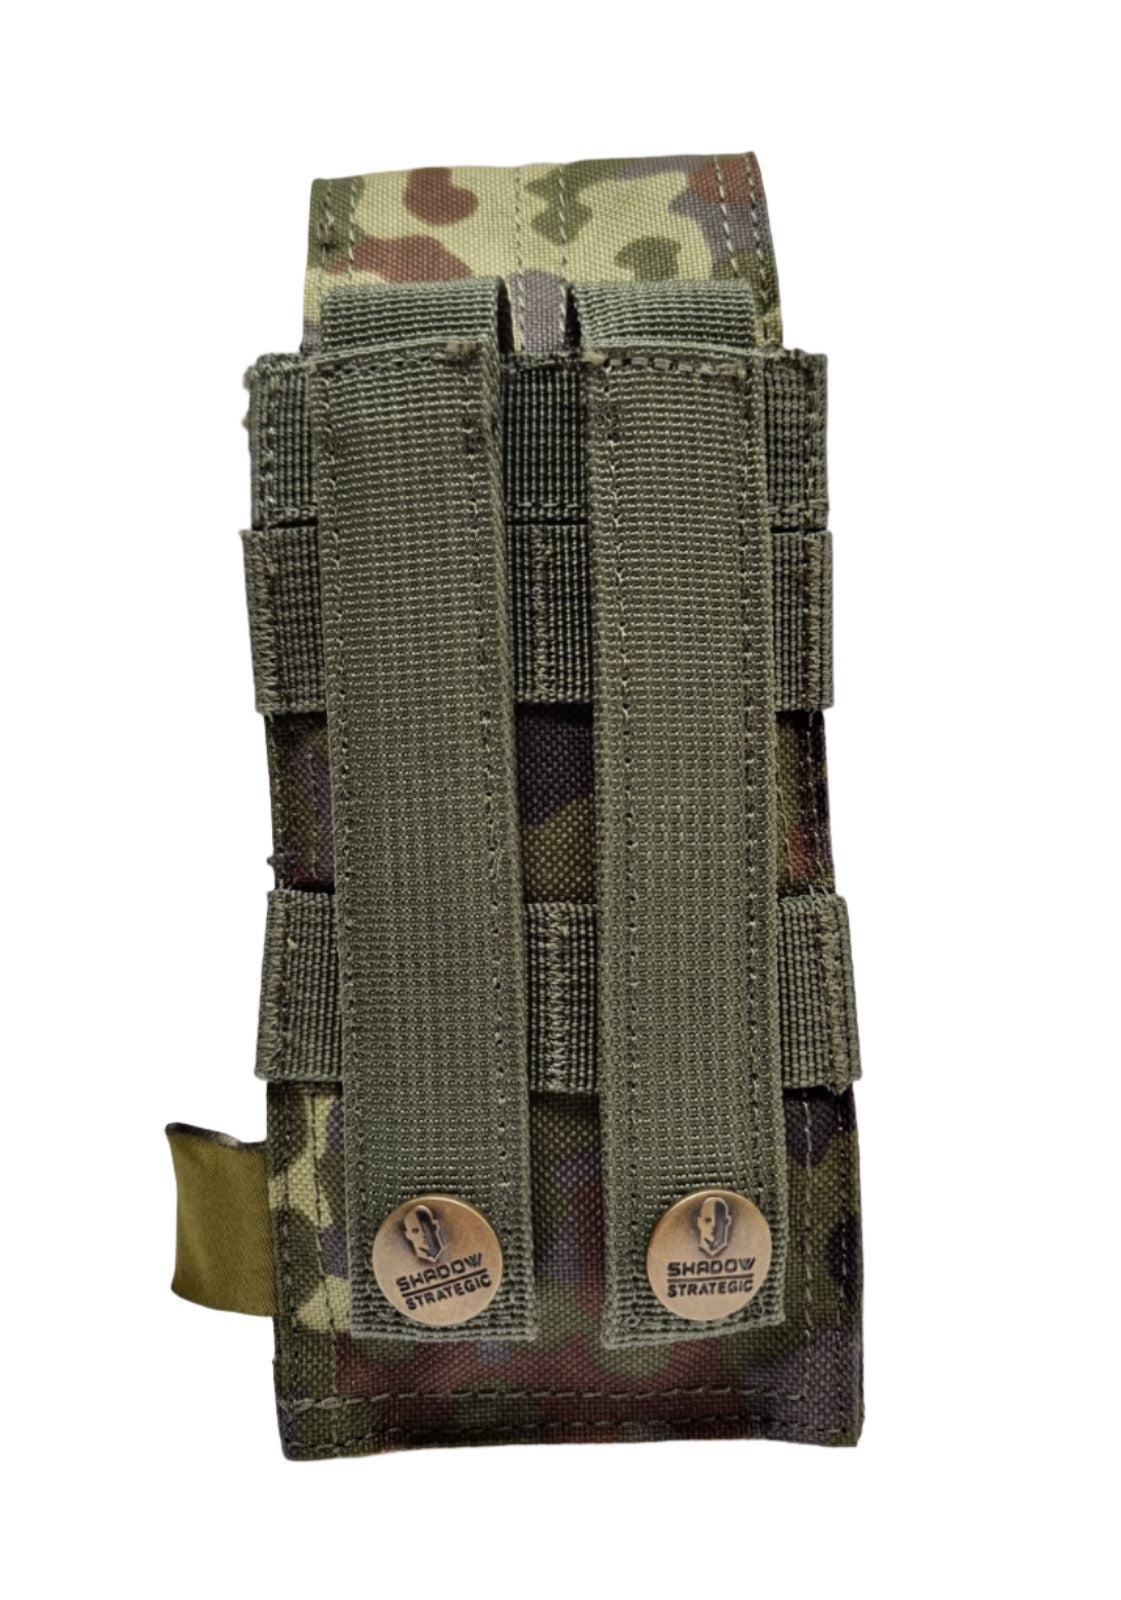 SHE-920 SINGLE M4 5.56MM MAG POUCH COLOR GERMAN FLECTARN BACKSIDE PIC